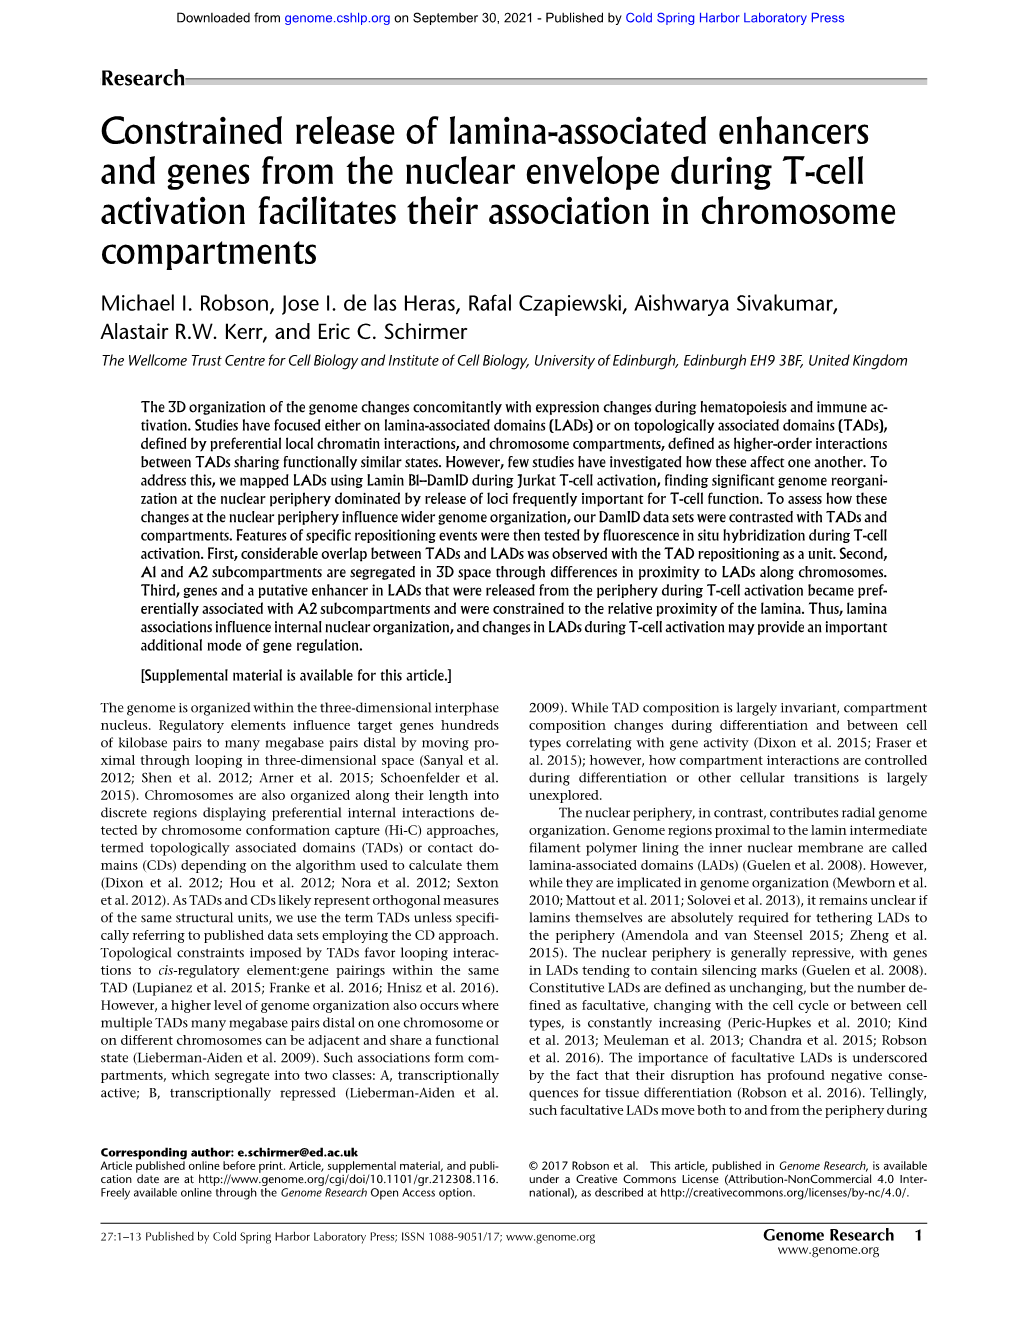 Constrained Release of Lamina-Associated Enhancers and Genes from the Nuclear Envelope During T-Cell Activation Facilitates Thei